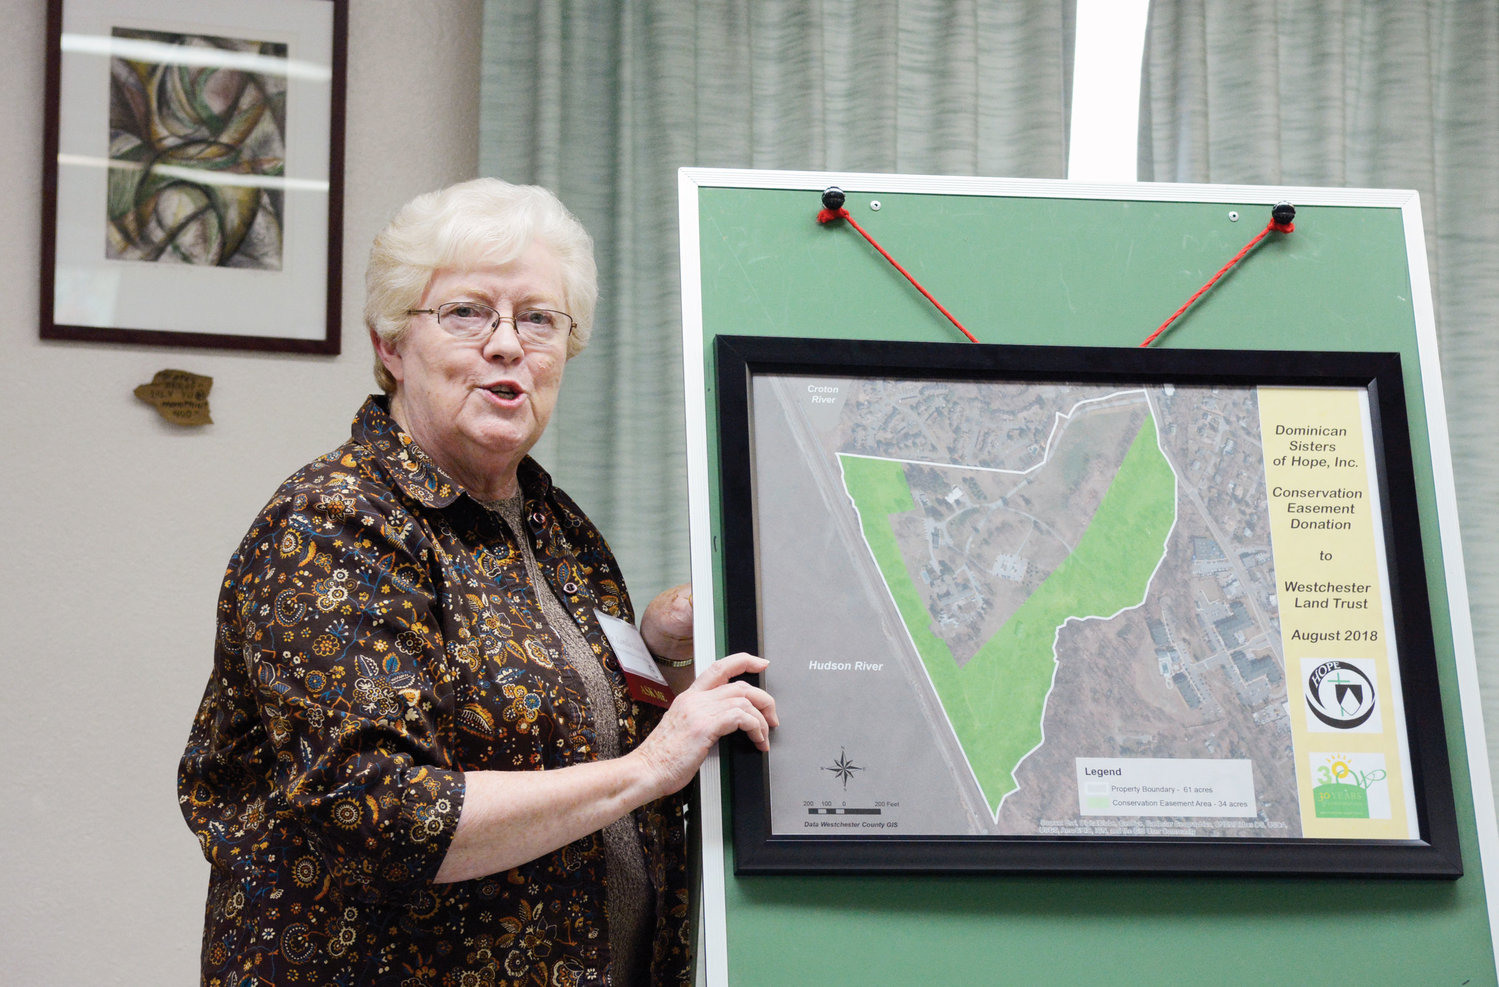 At the press conference, Sister Lorelle Elcock stands by a map of the property which shows which section of land will be preserved through the conservation easement.